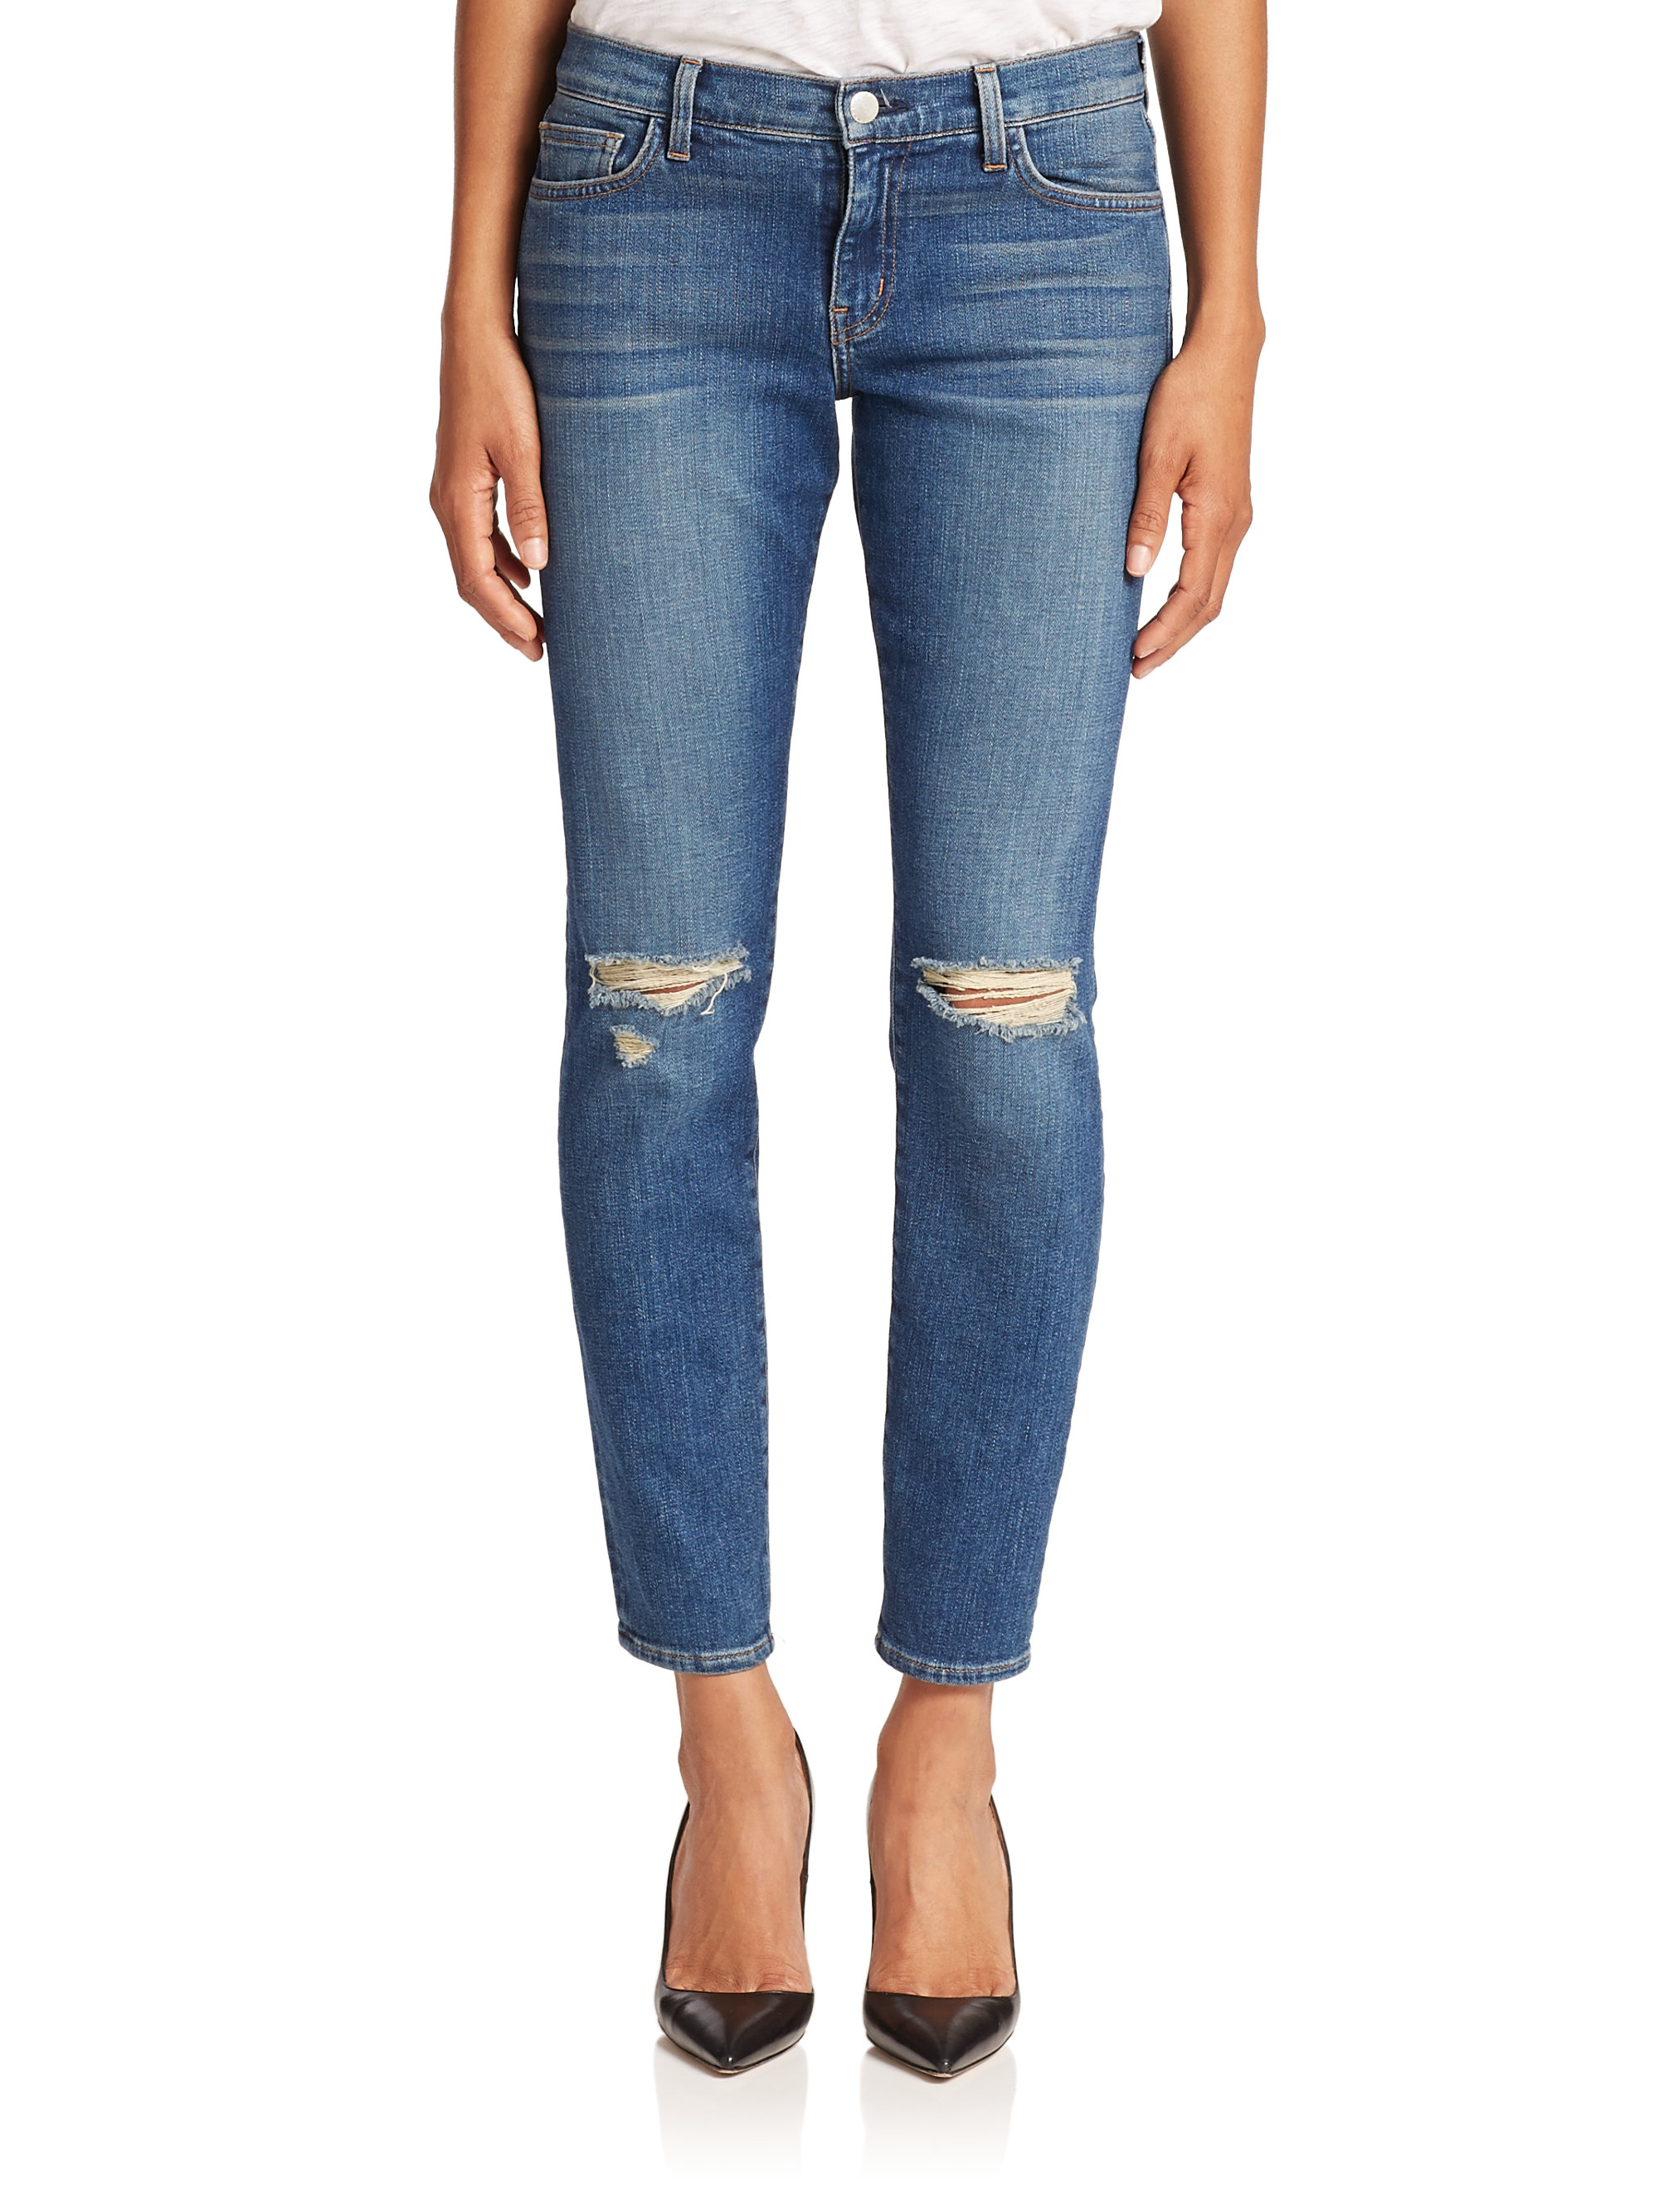 Lyst - L'Agence Mon Jules The Perfect Fit Jeans in Blue